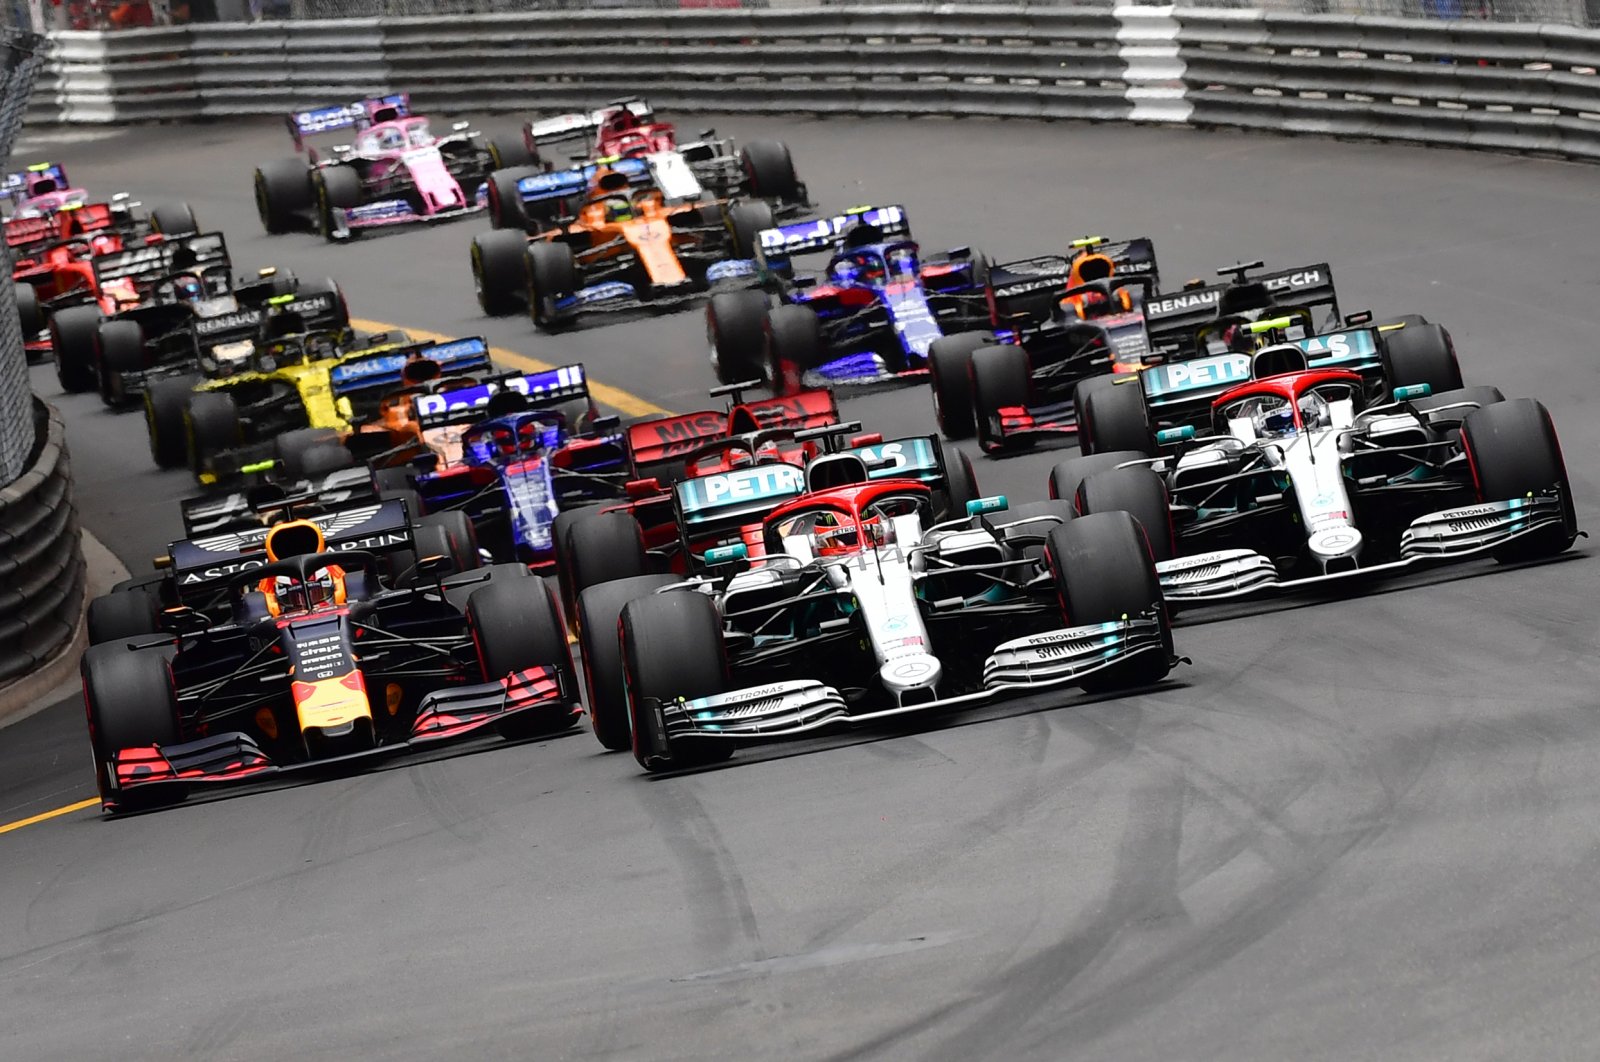 Mercedes driver Lewis Hamilton (C) takes the lead at the start of the Monaco Formula 1 Grand Prix in Monaco, May 26, 2019. (AFP Photo)